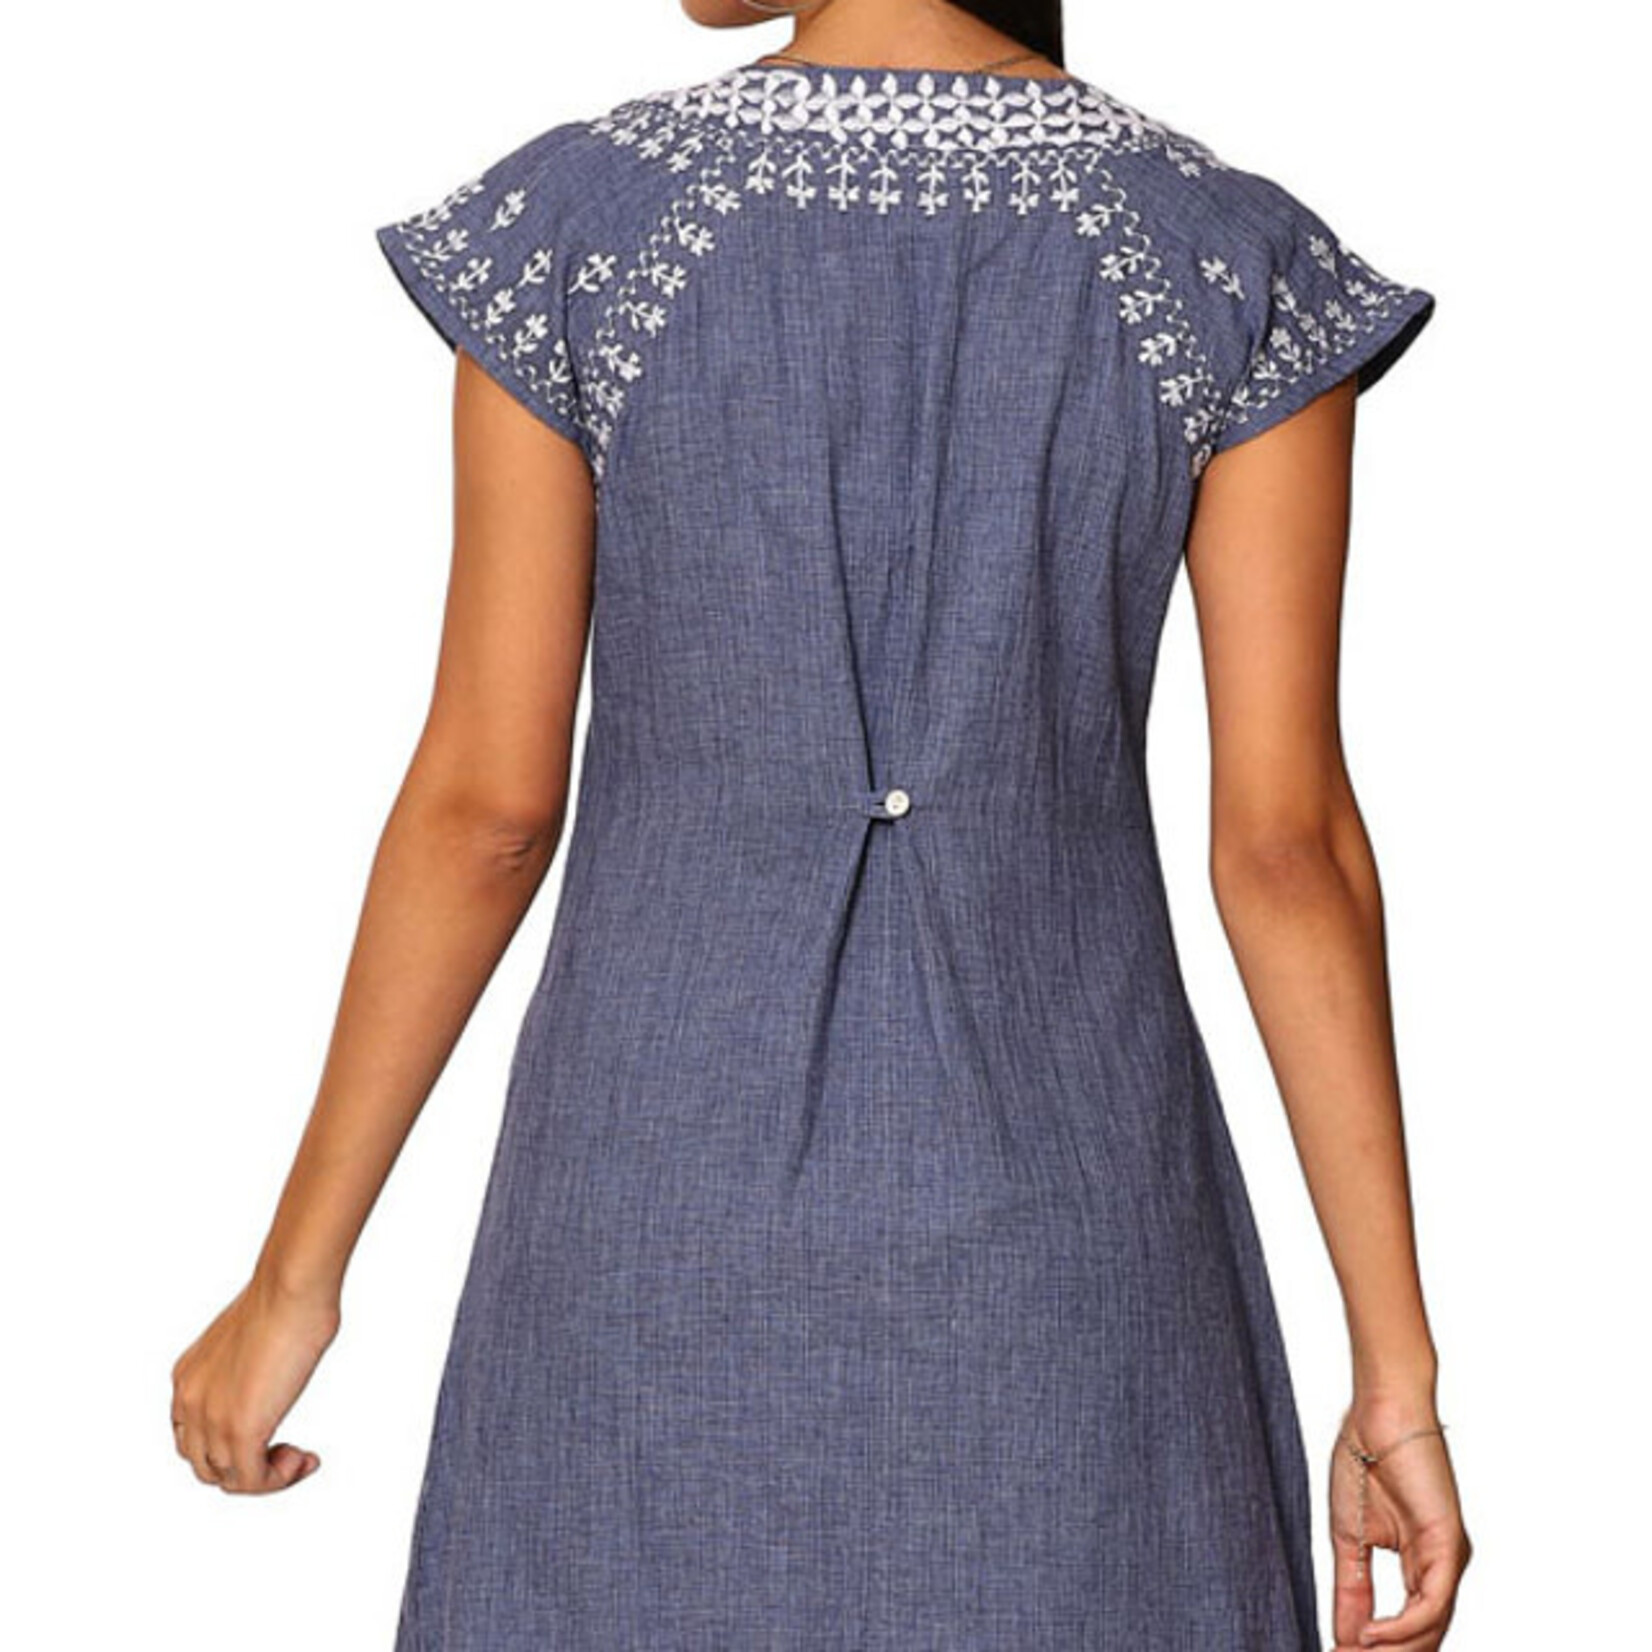 Parsley and Sage Chambray Embroidered Cap Sleeve Dress